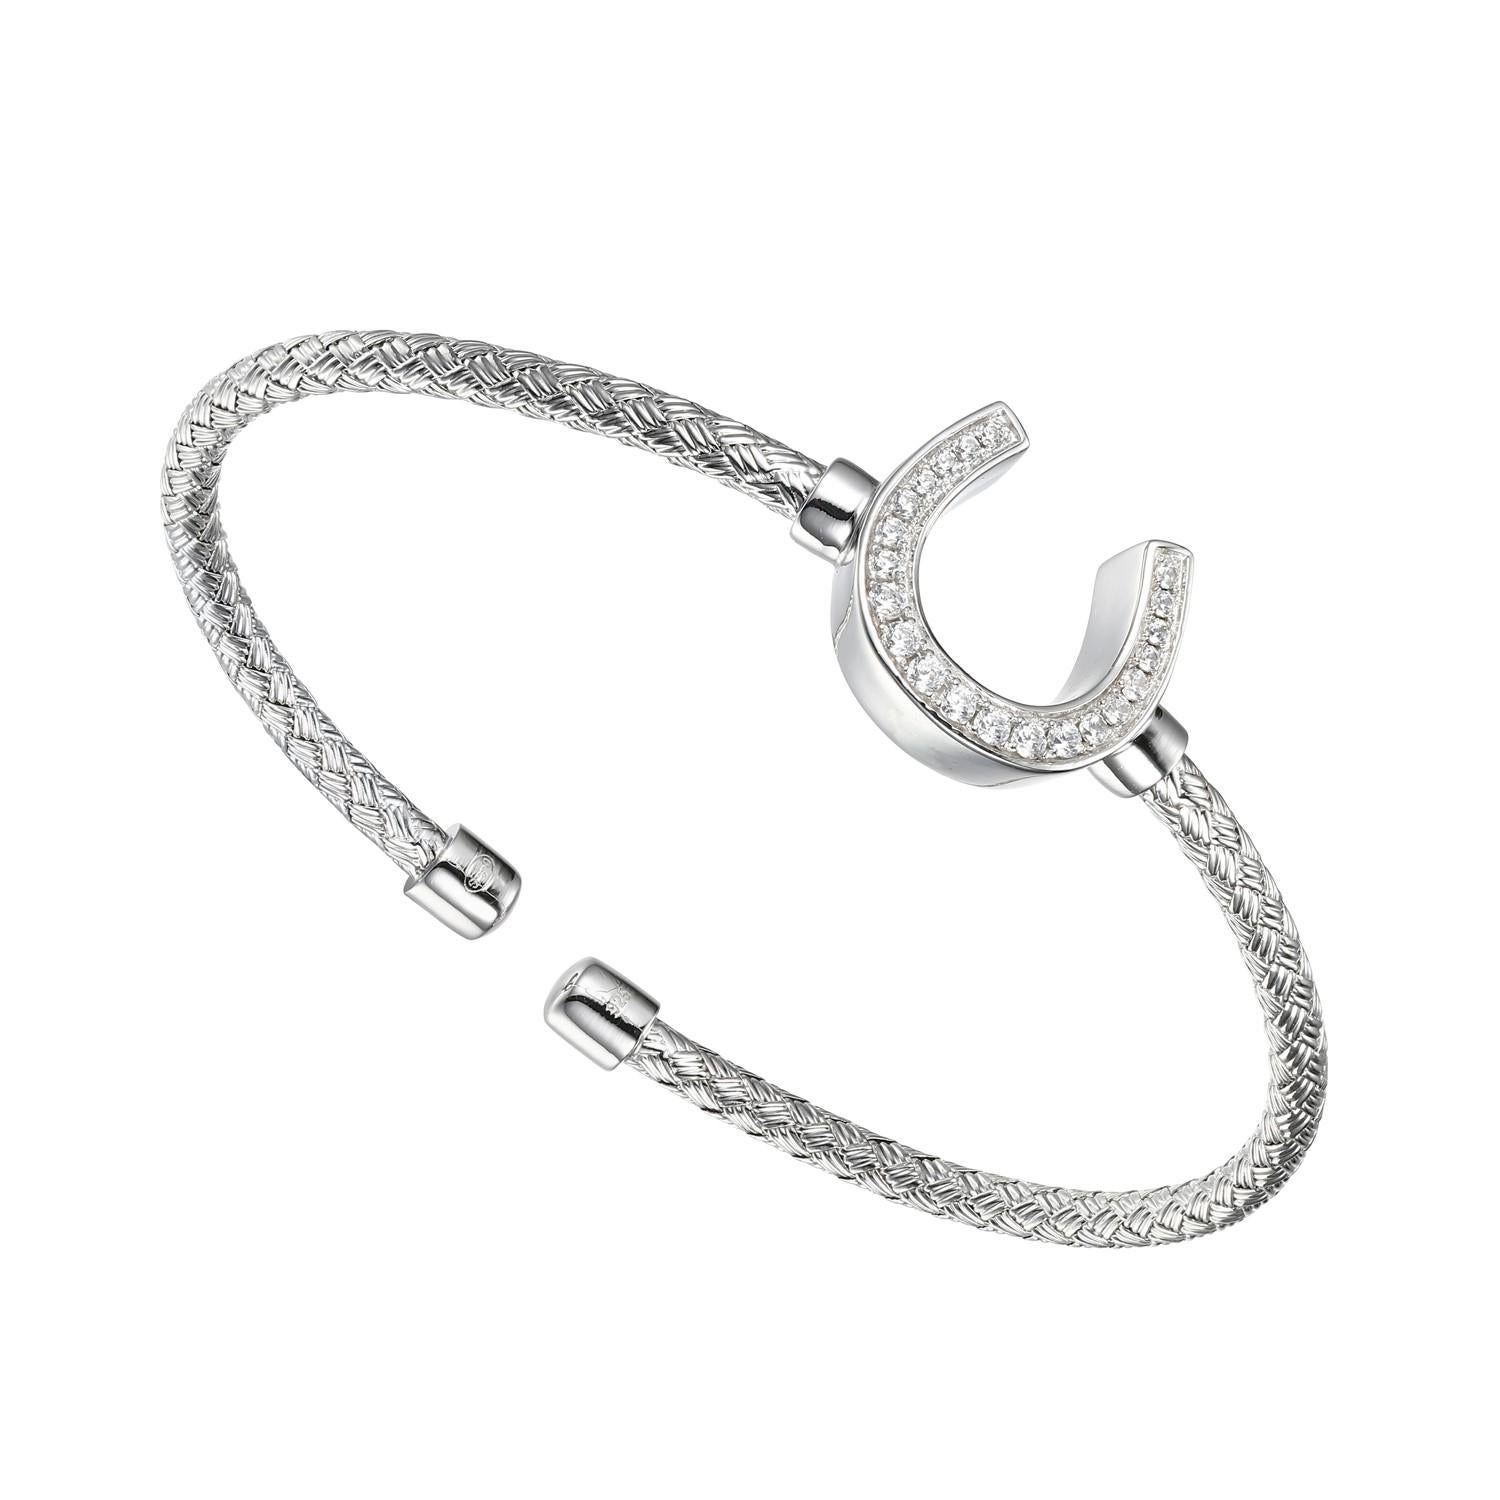 Sterling Silver 3mm Mesh Cuff with CZ Horseshoe (16x14mm) in Center, Rhodium Finish